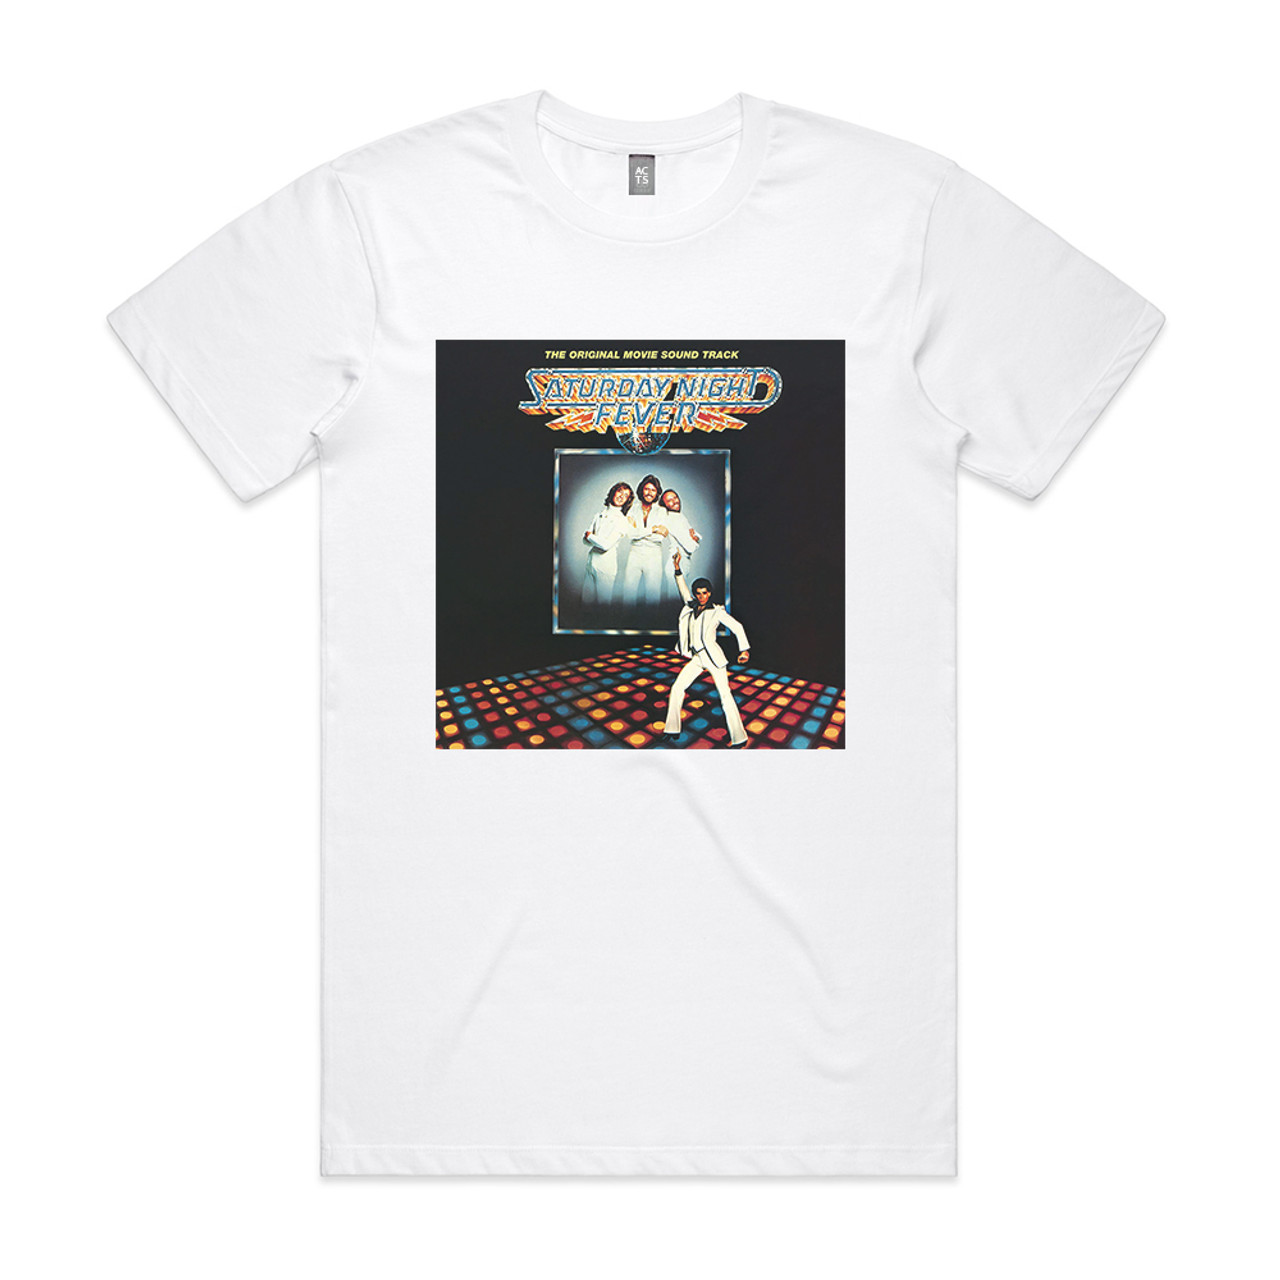 Bee Gees Saturday Night Fever Album Cover T-Shirt White